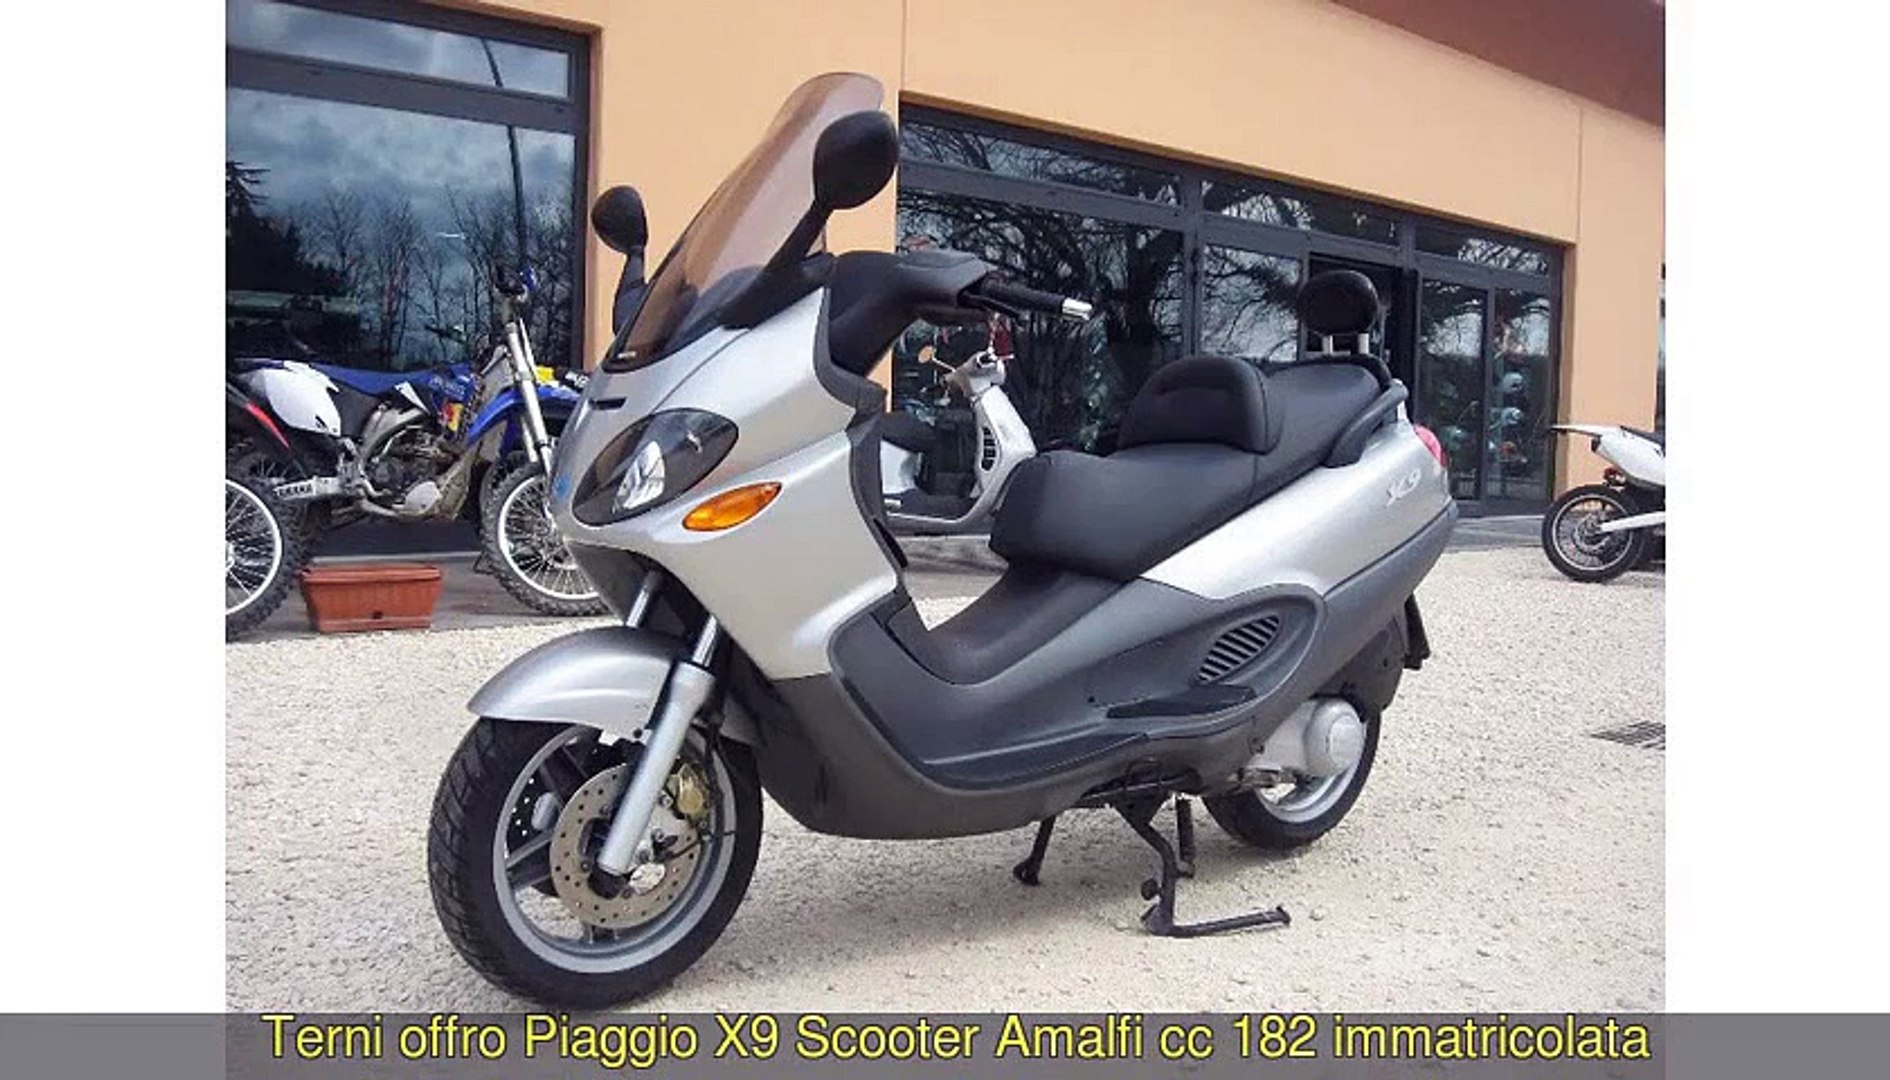 PIAGGIO X9 Scooter cc 182 - Video Dailymotion